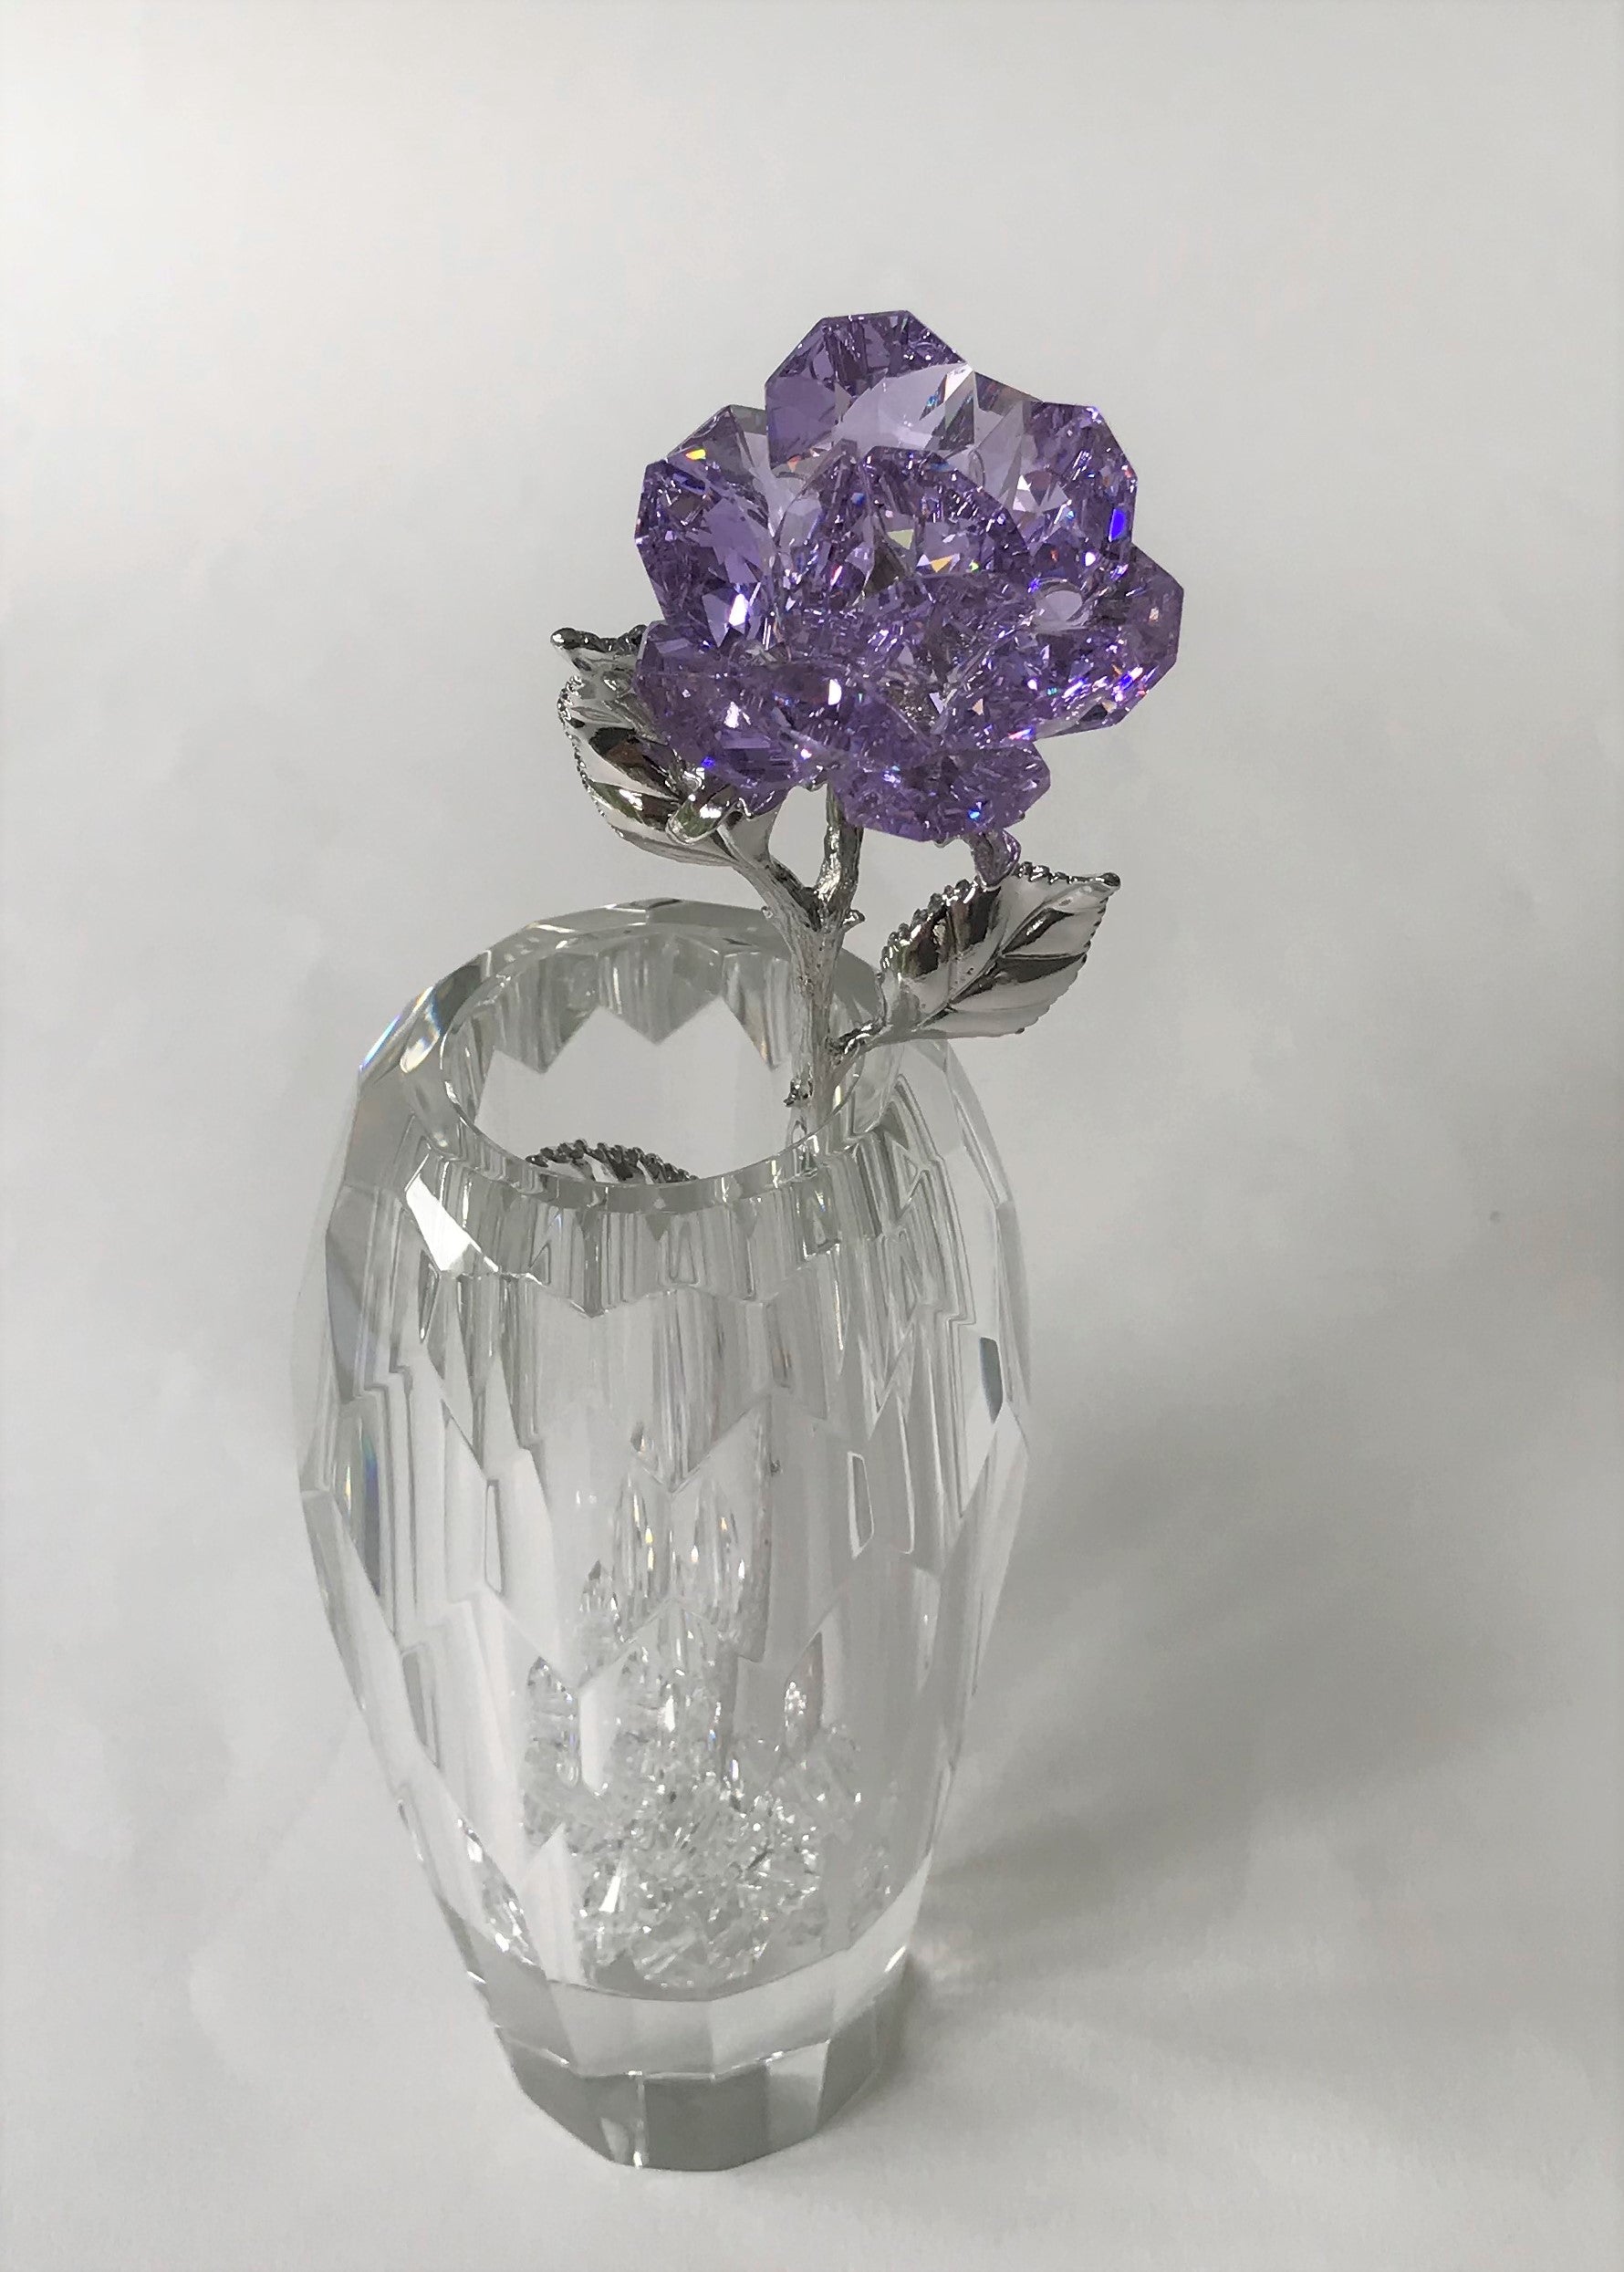 Purple Crystal Rose Handcrafted By Bjcrystalgifts Using Swarovski Crystals In A Faceted Crystal Vase